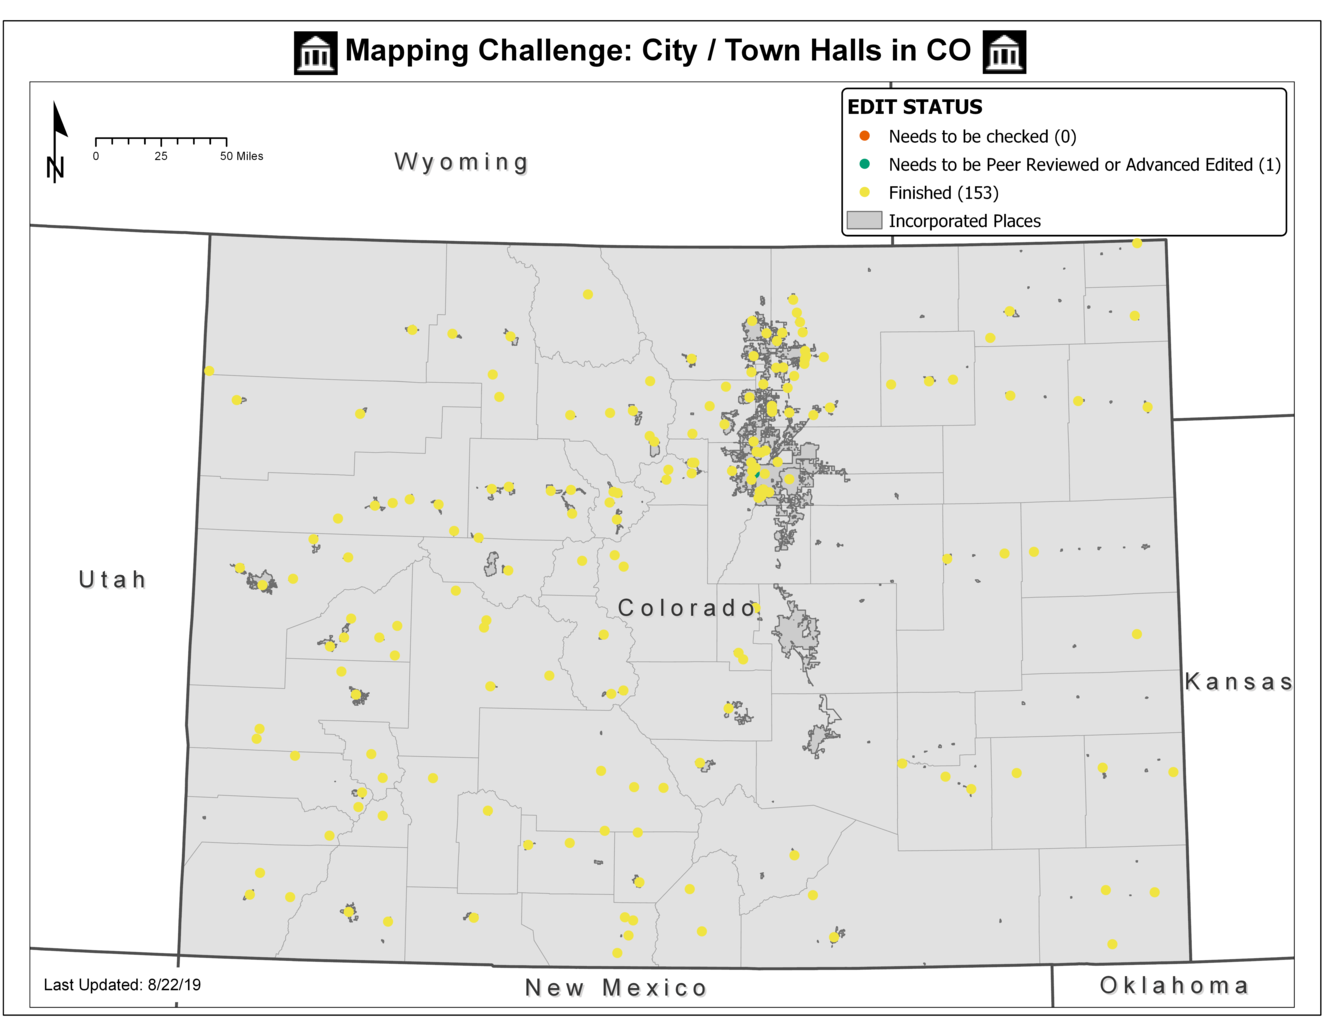 TNMCorps Mapping Challenge: City / Town Halls in CO